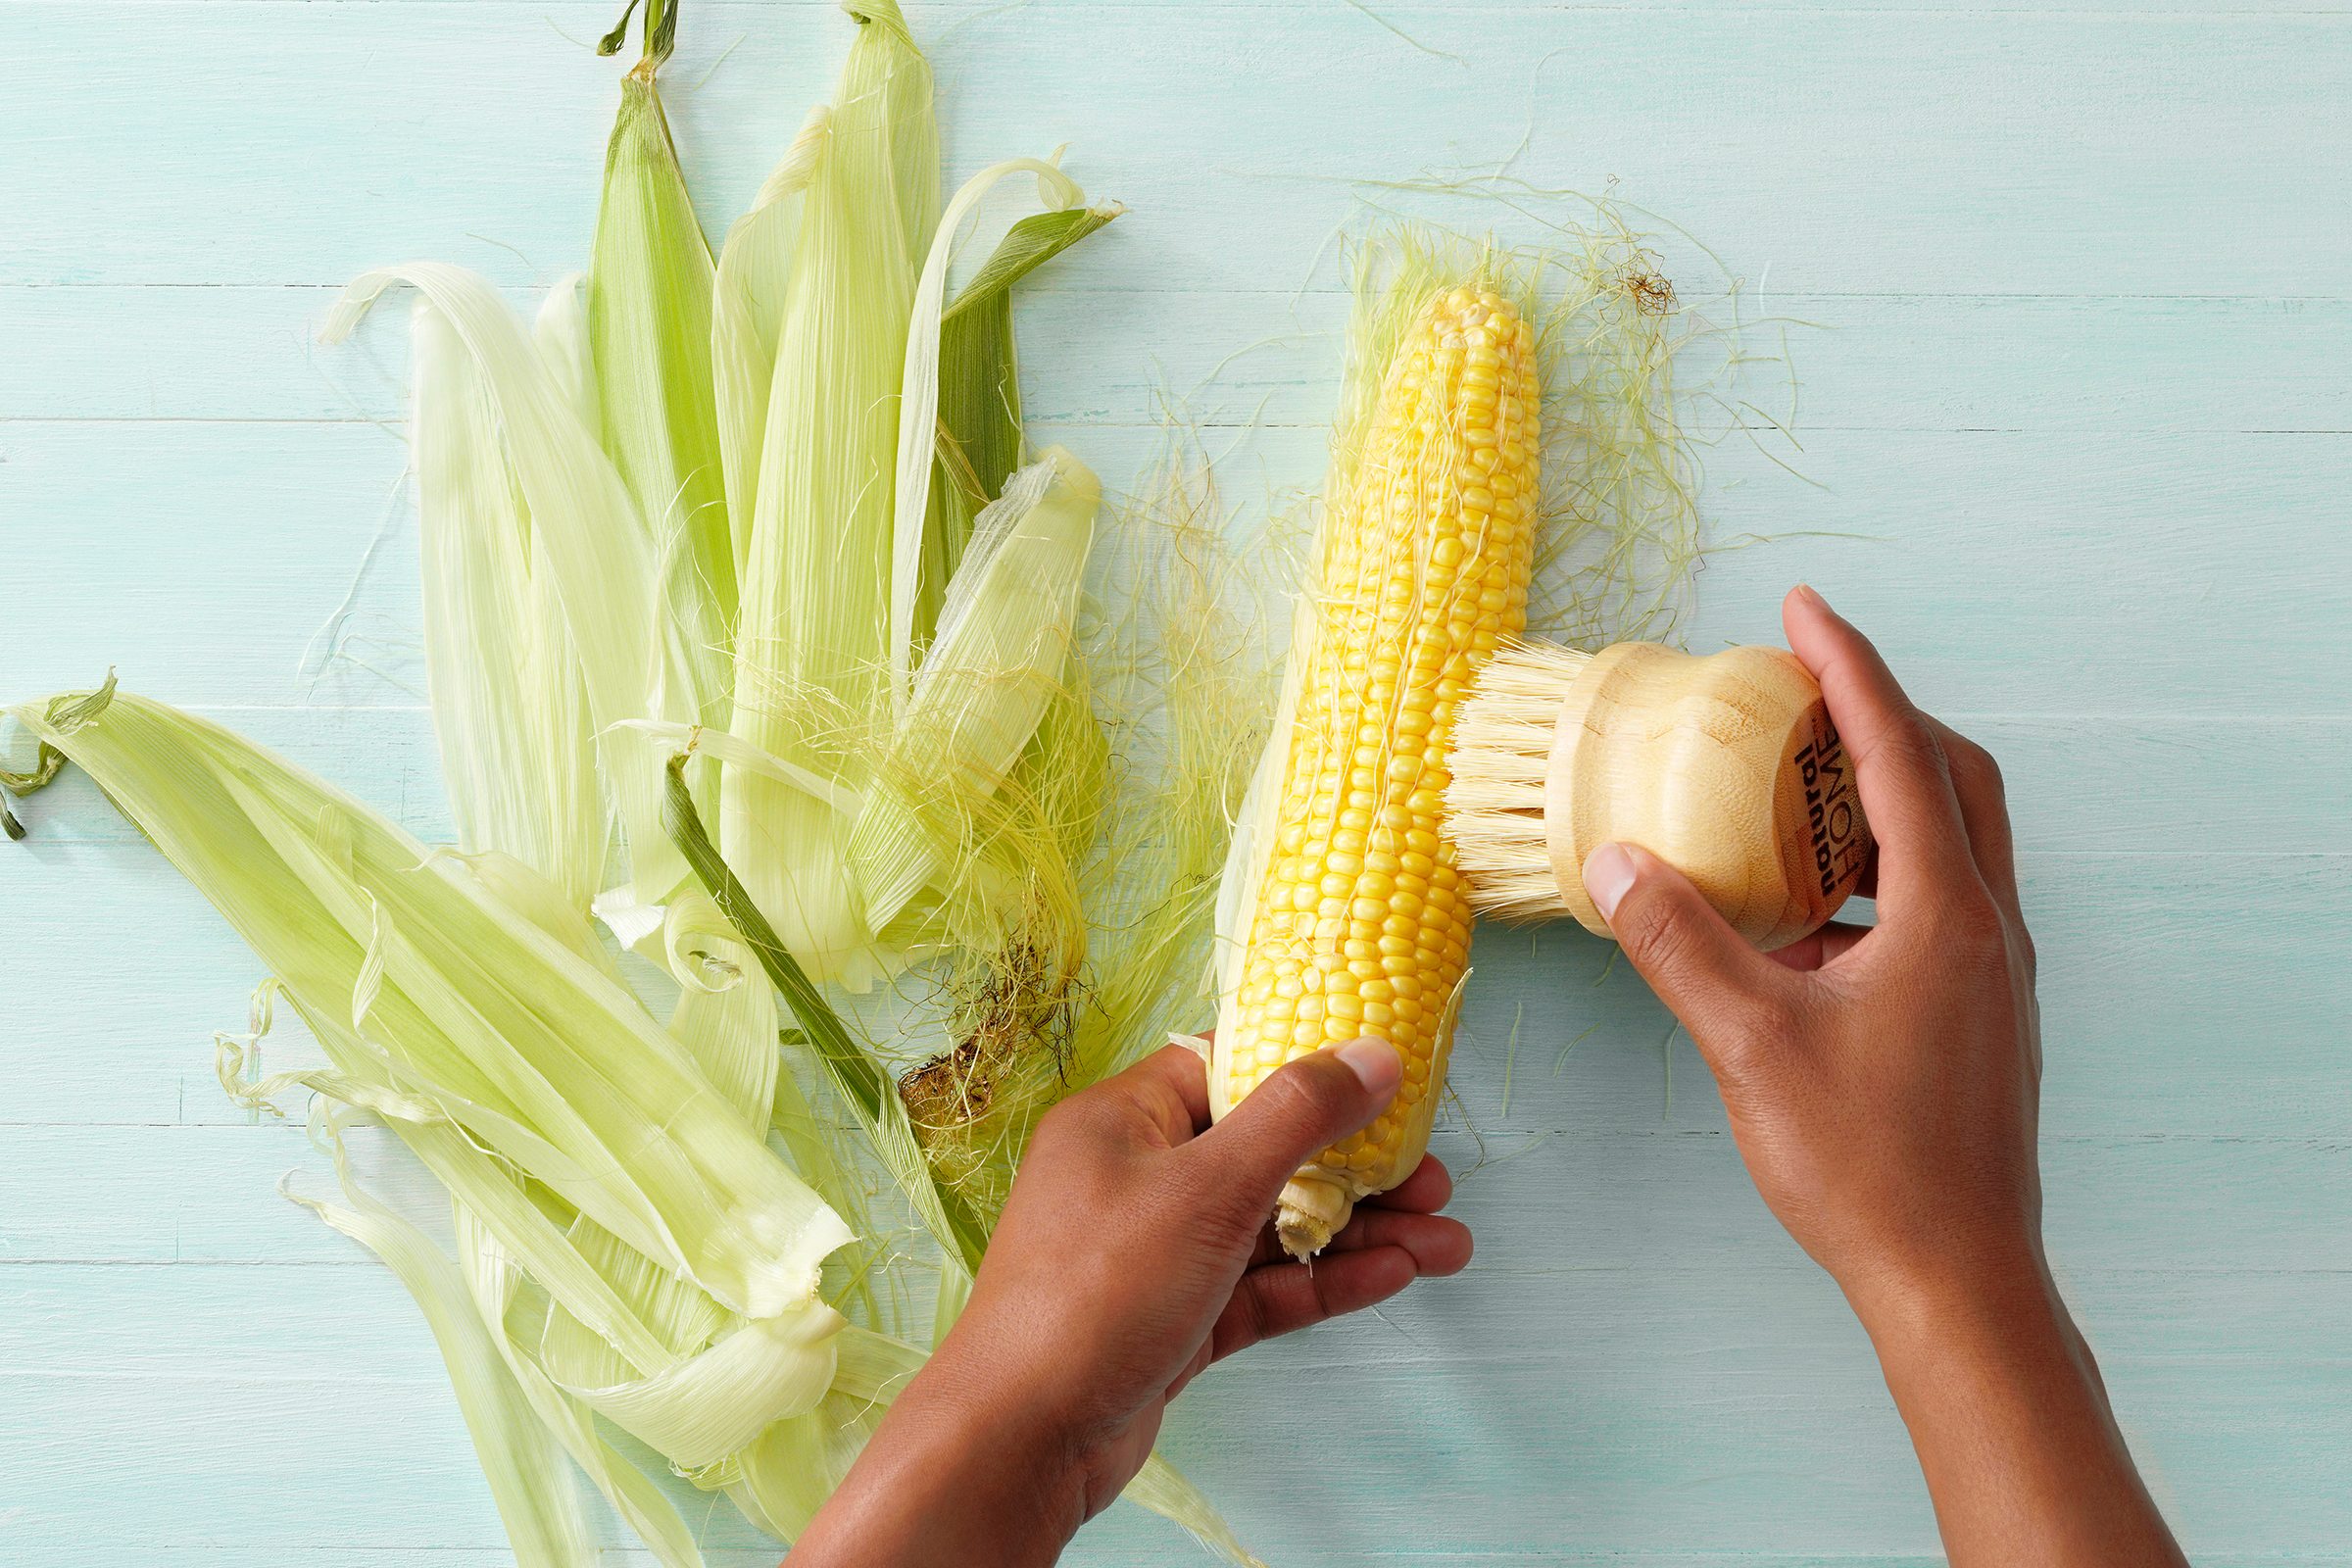 Four Methods Of Removing Silk From Corn On The Cob